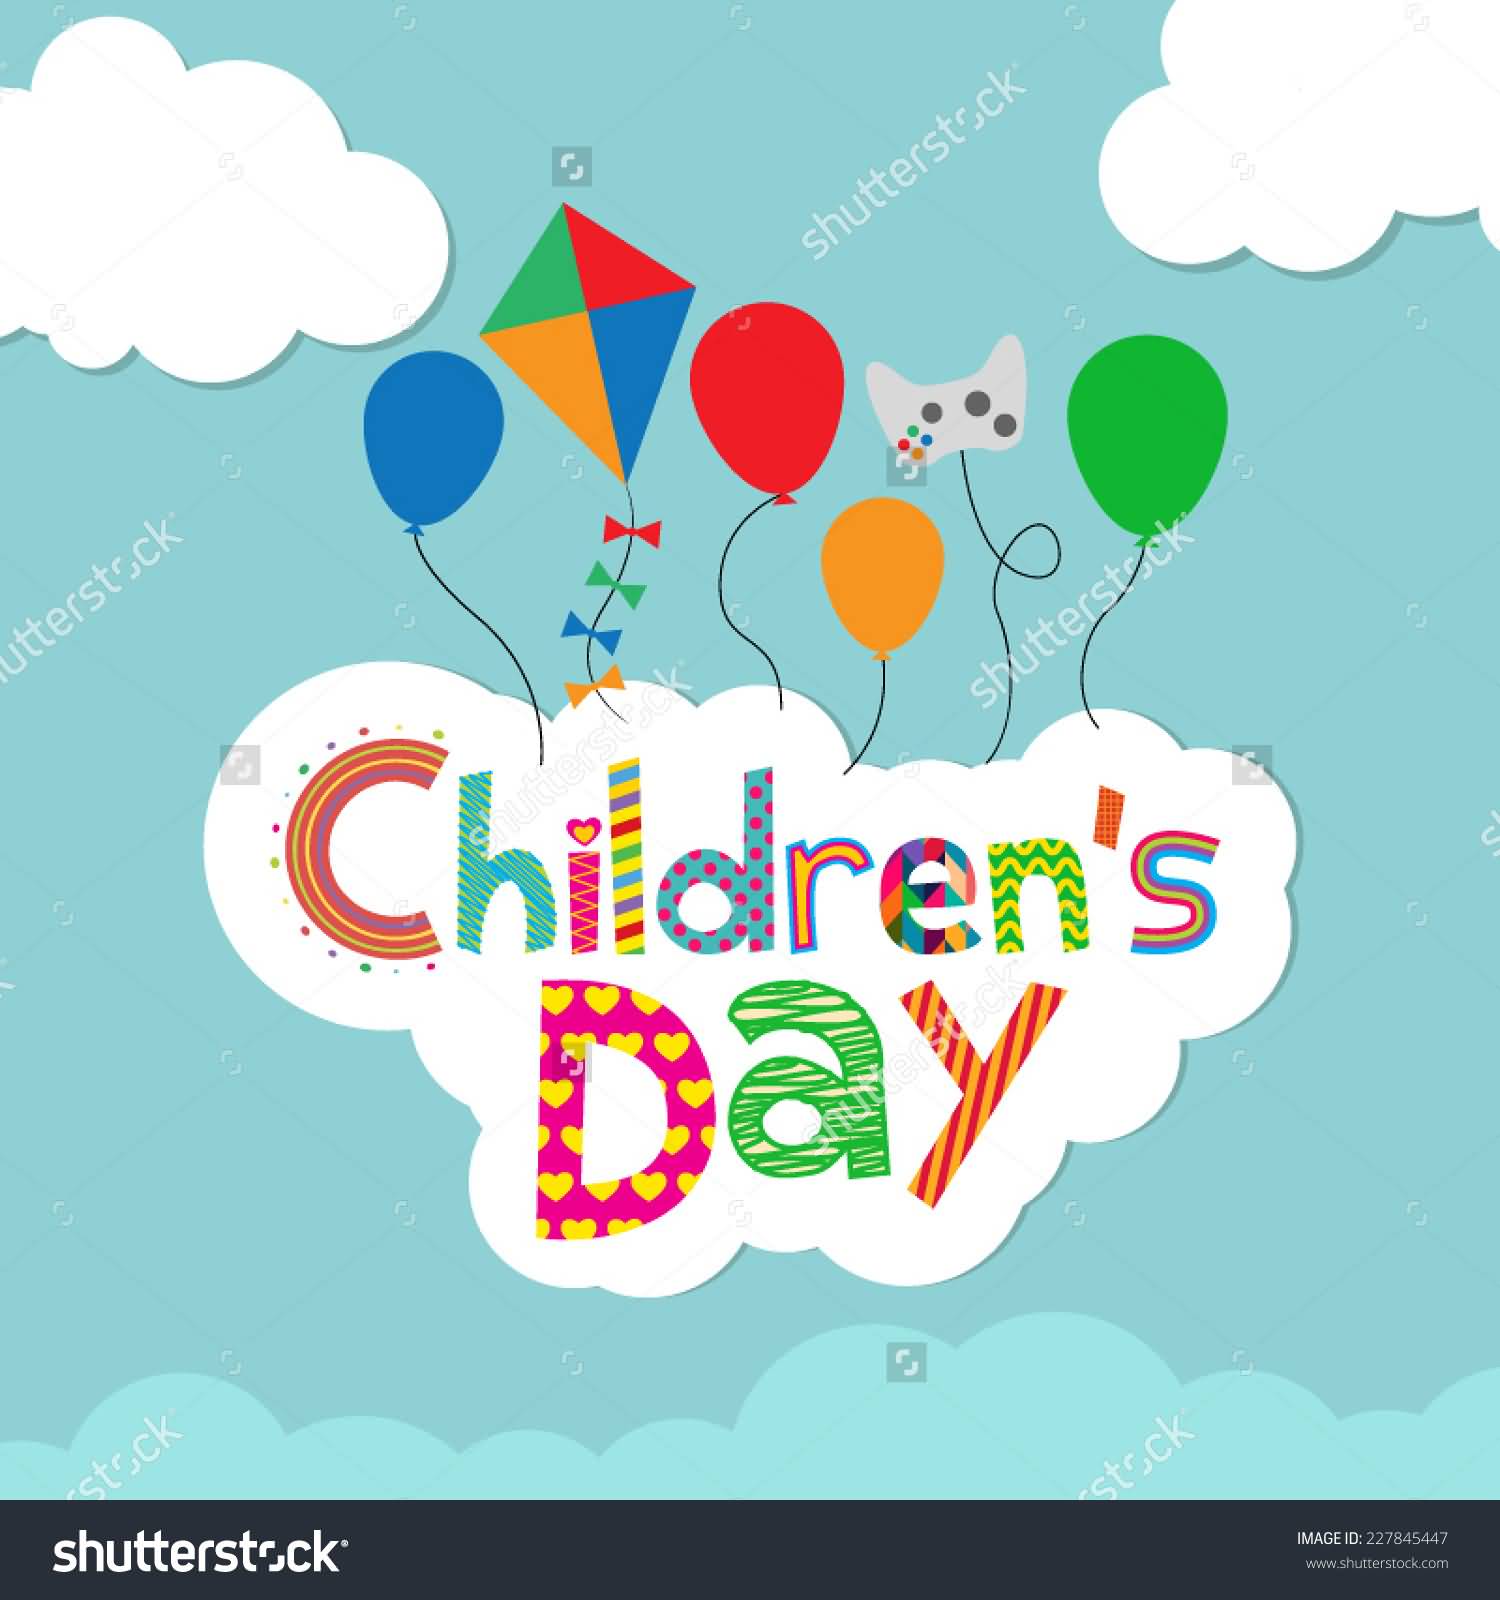 Children's Day Balloons, Kite And Remote Control With Cloud Illustration